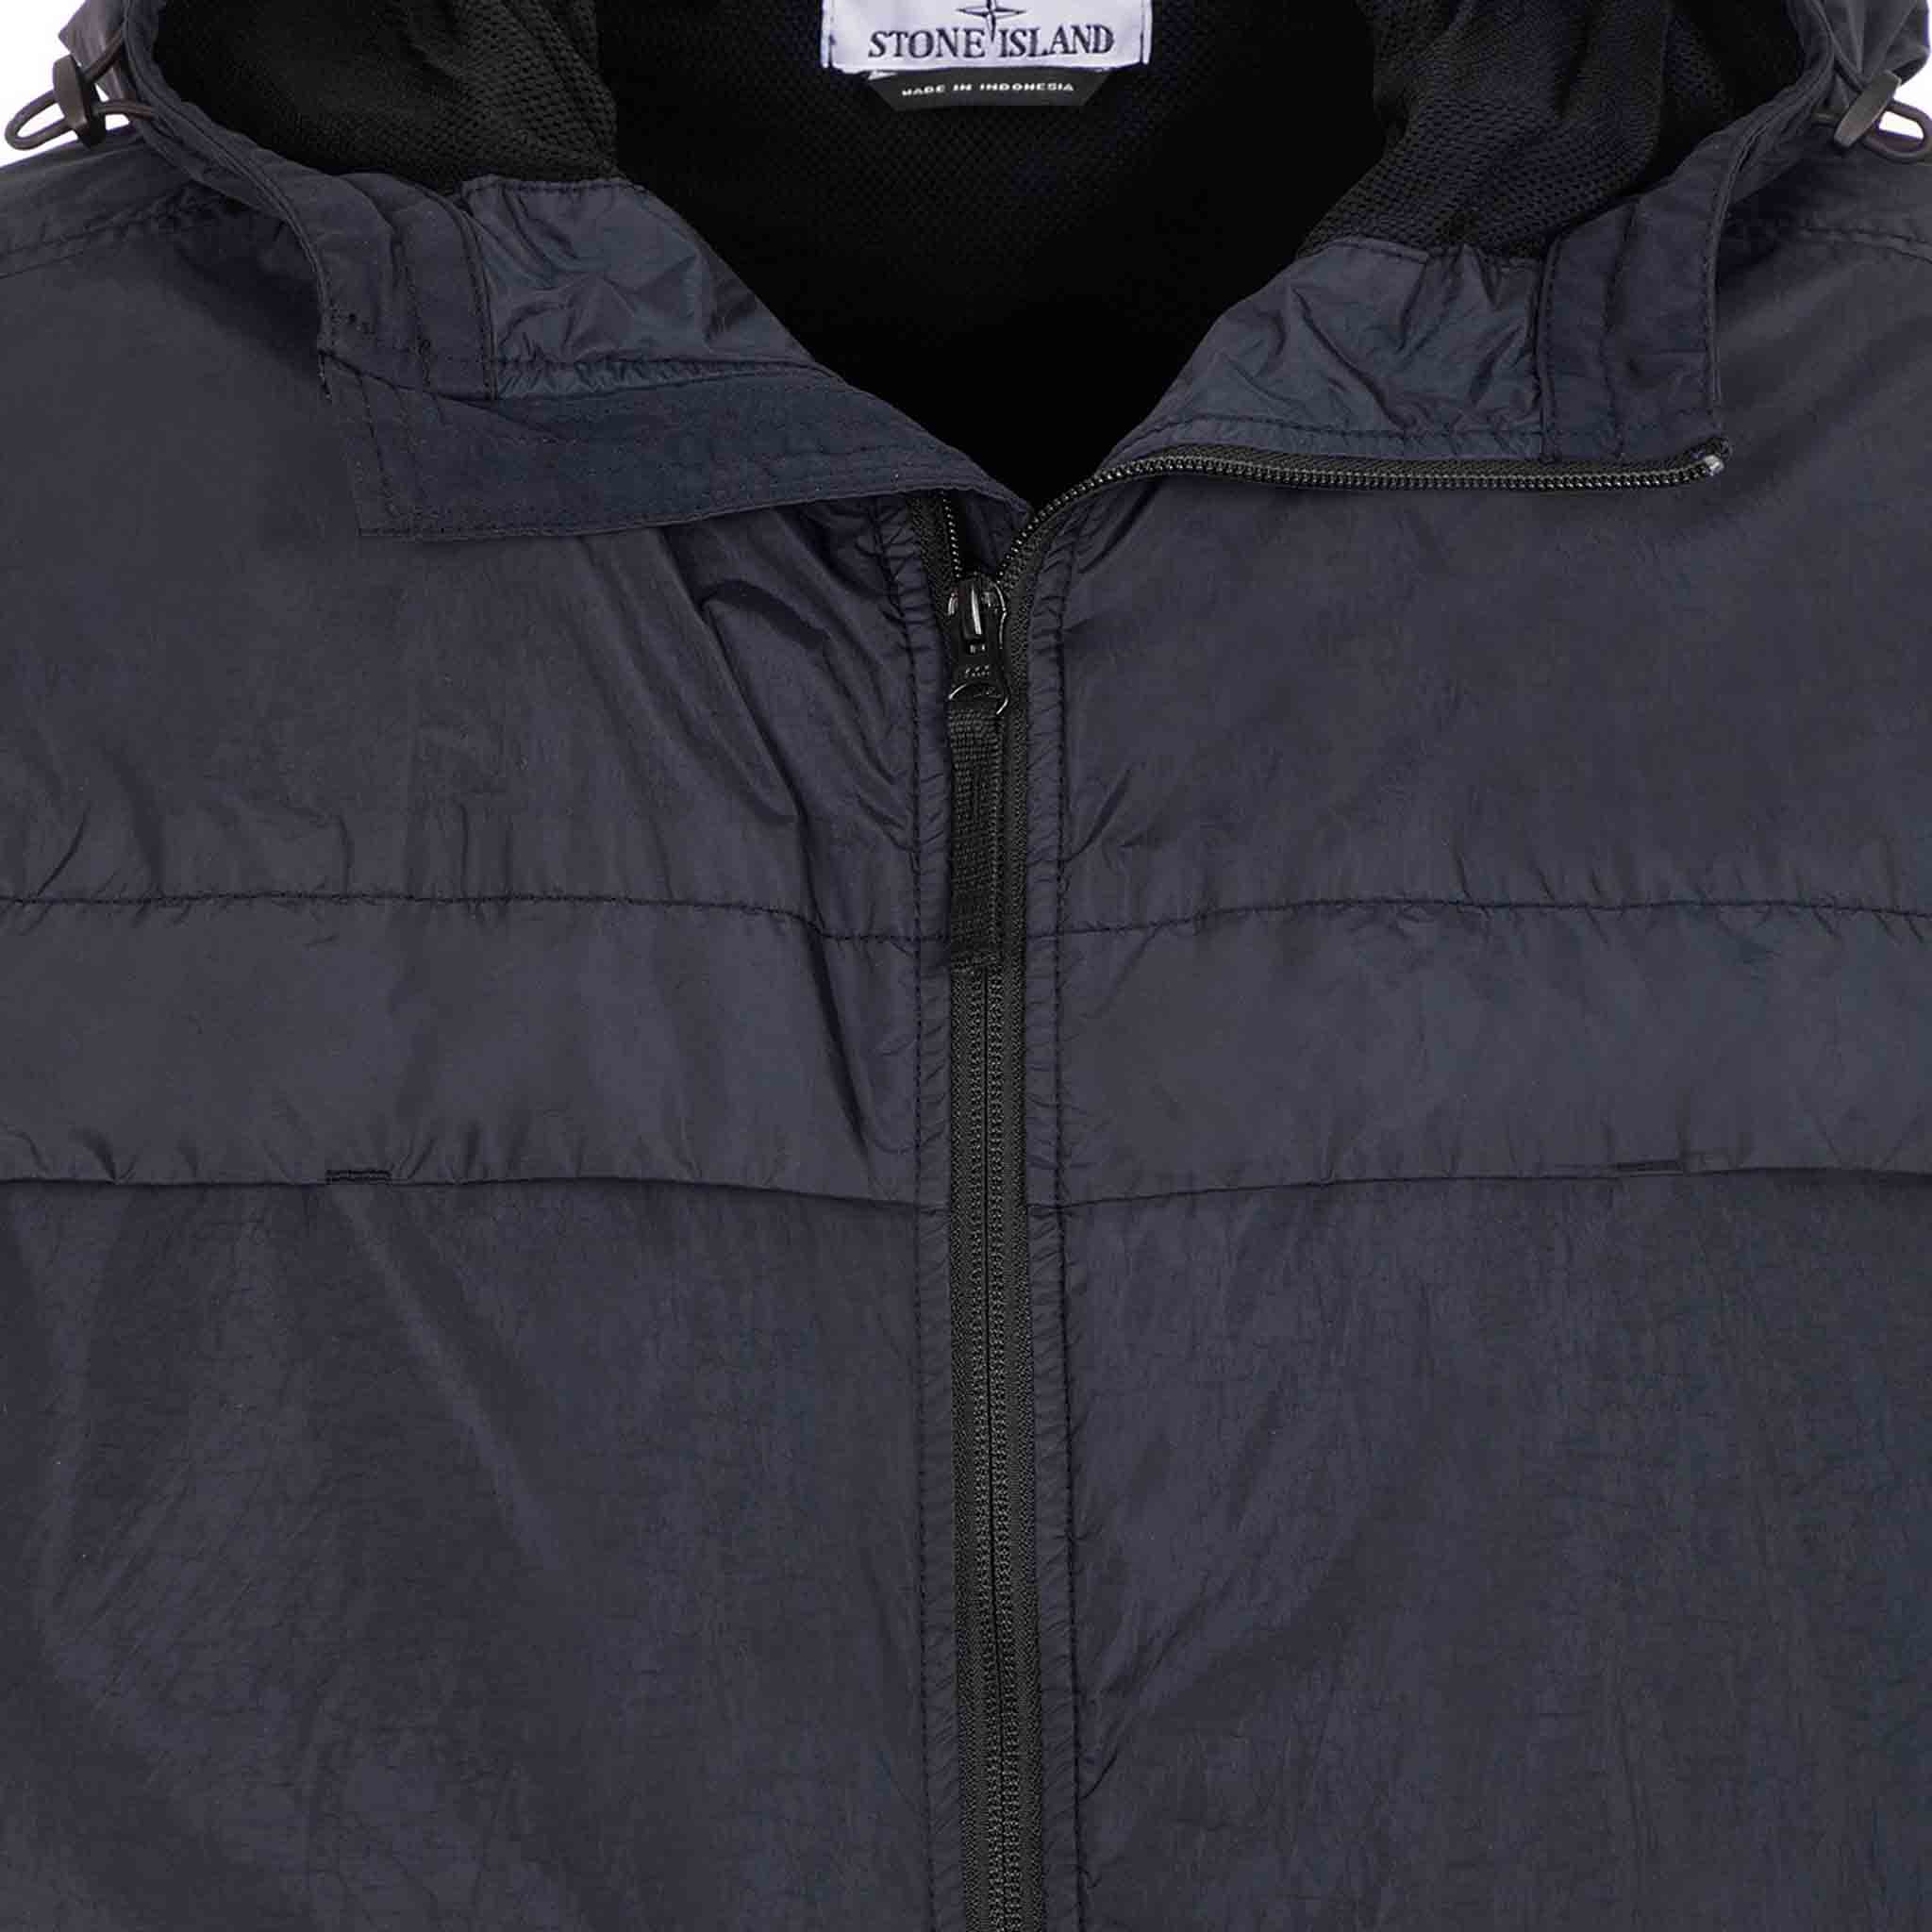 Stone Island Garment Dyed Crinkle Reps R-NY Hooded Jacket in Navy